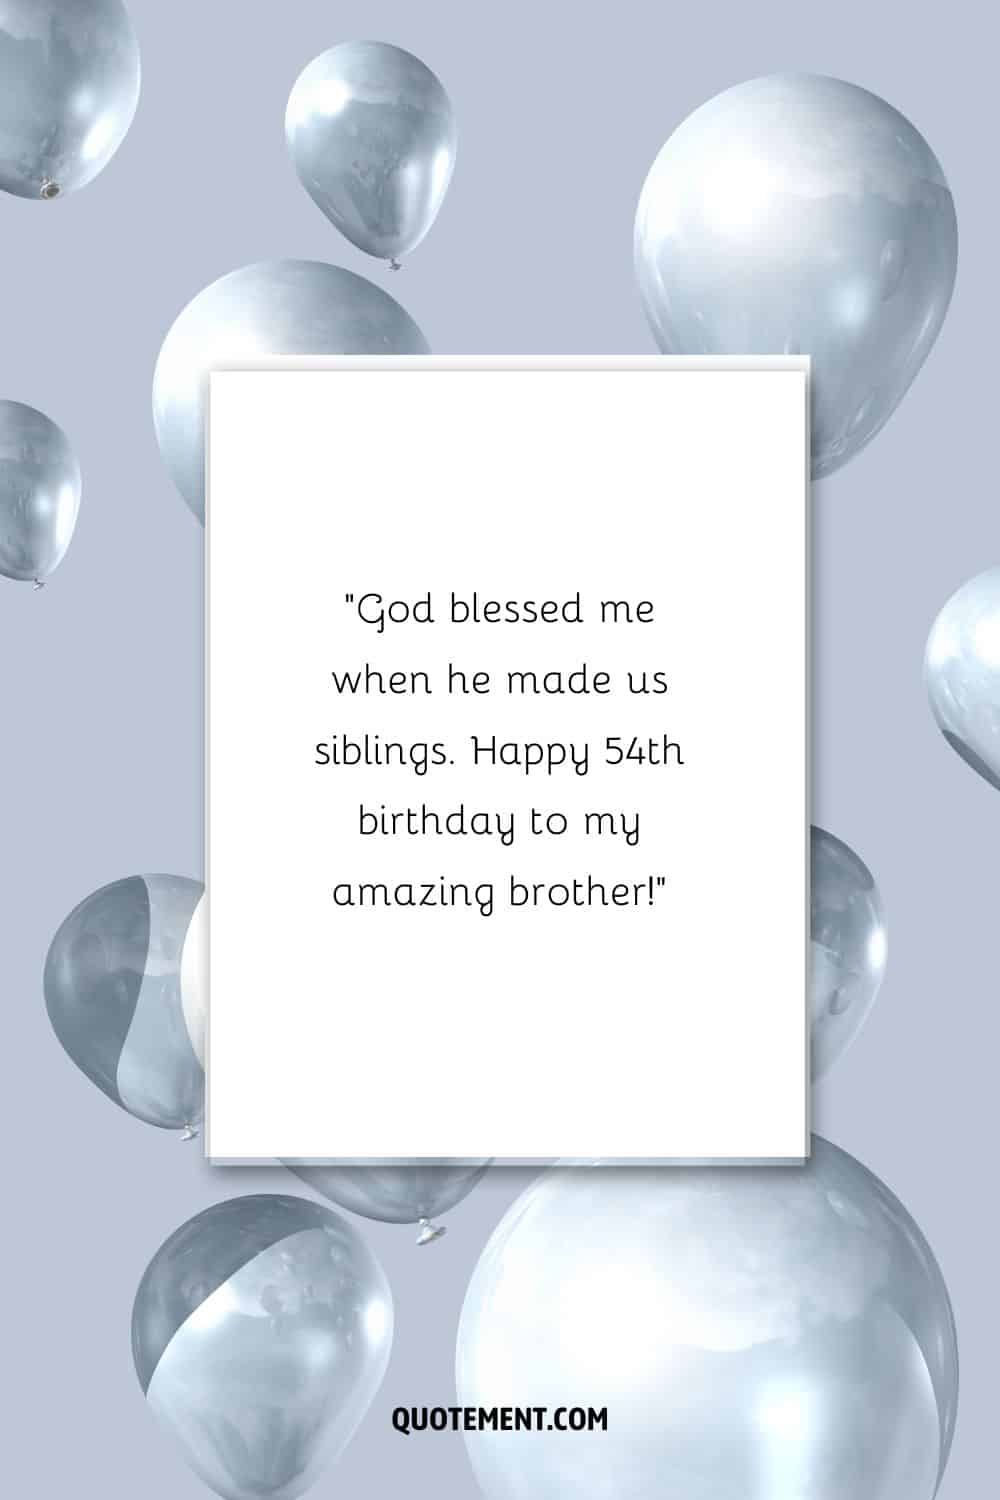 Birthday message for a brother who turns 54 and silver balloons in the background
